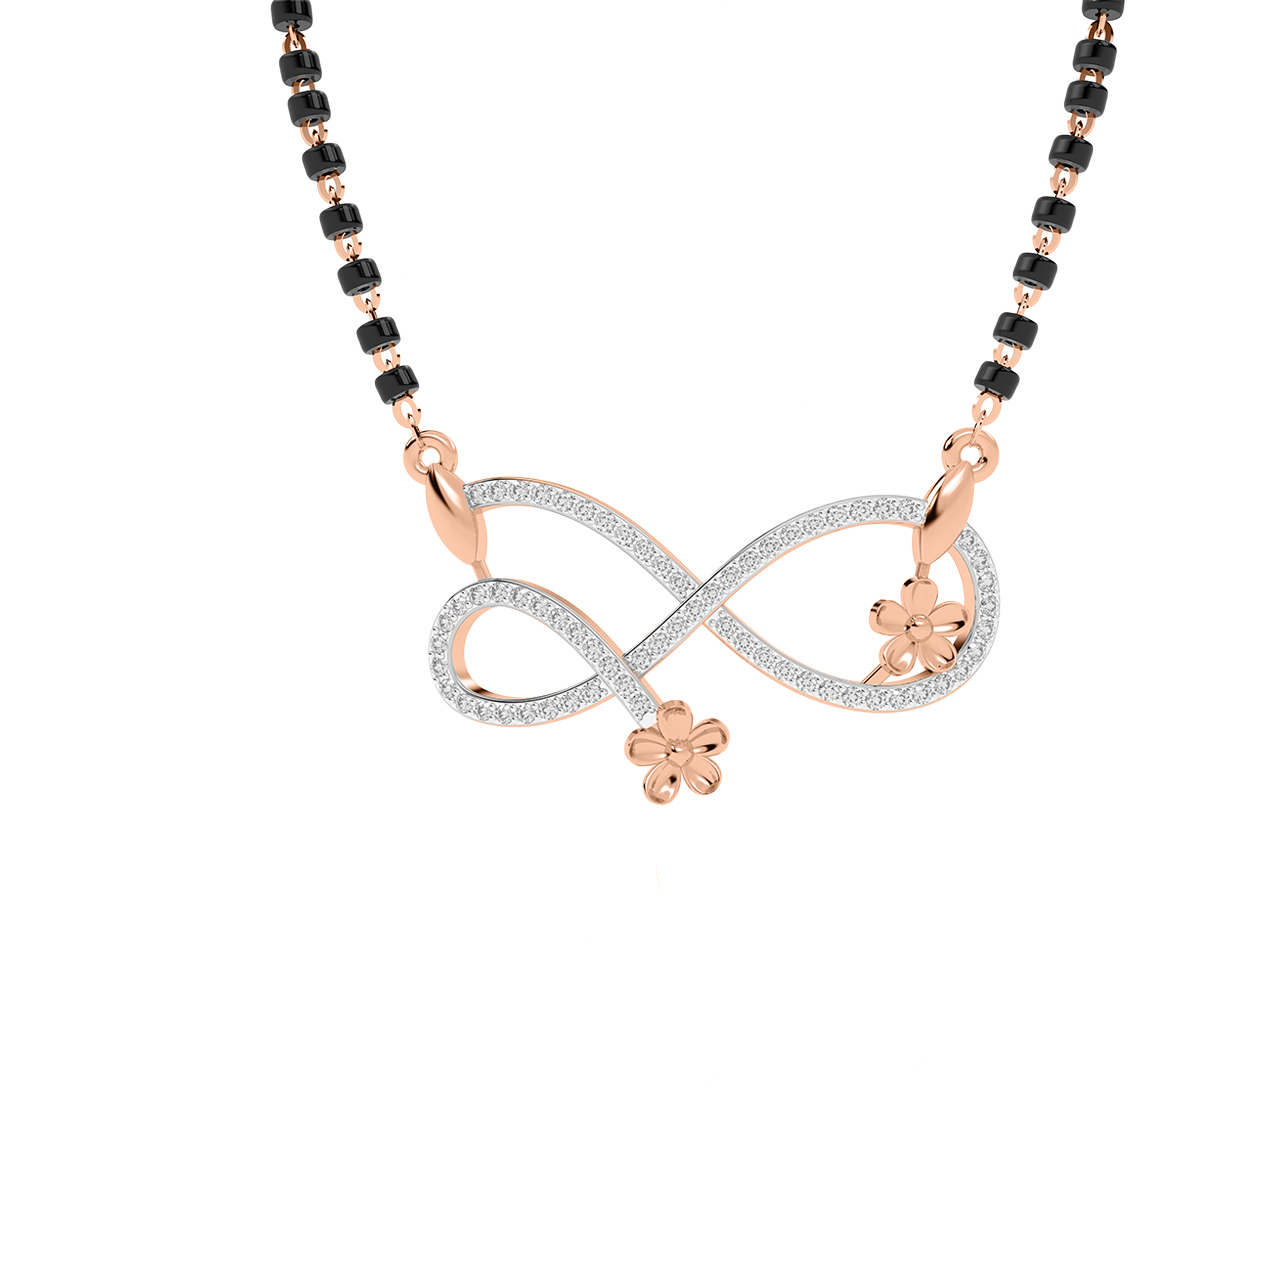 Infinity Design Mangalsutra With Chain